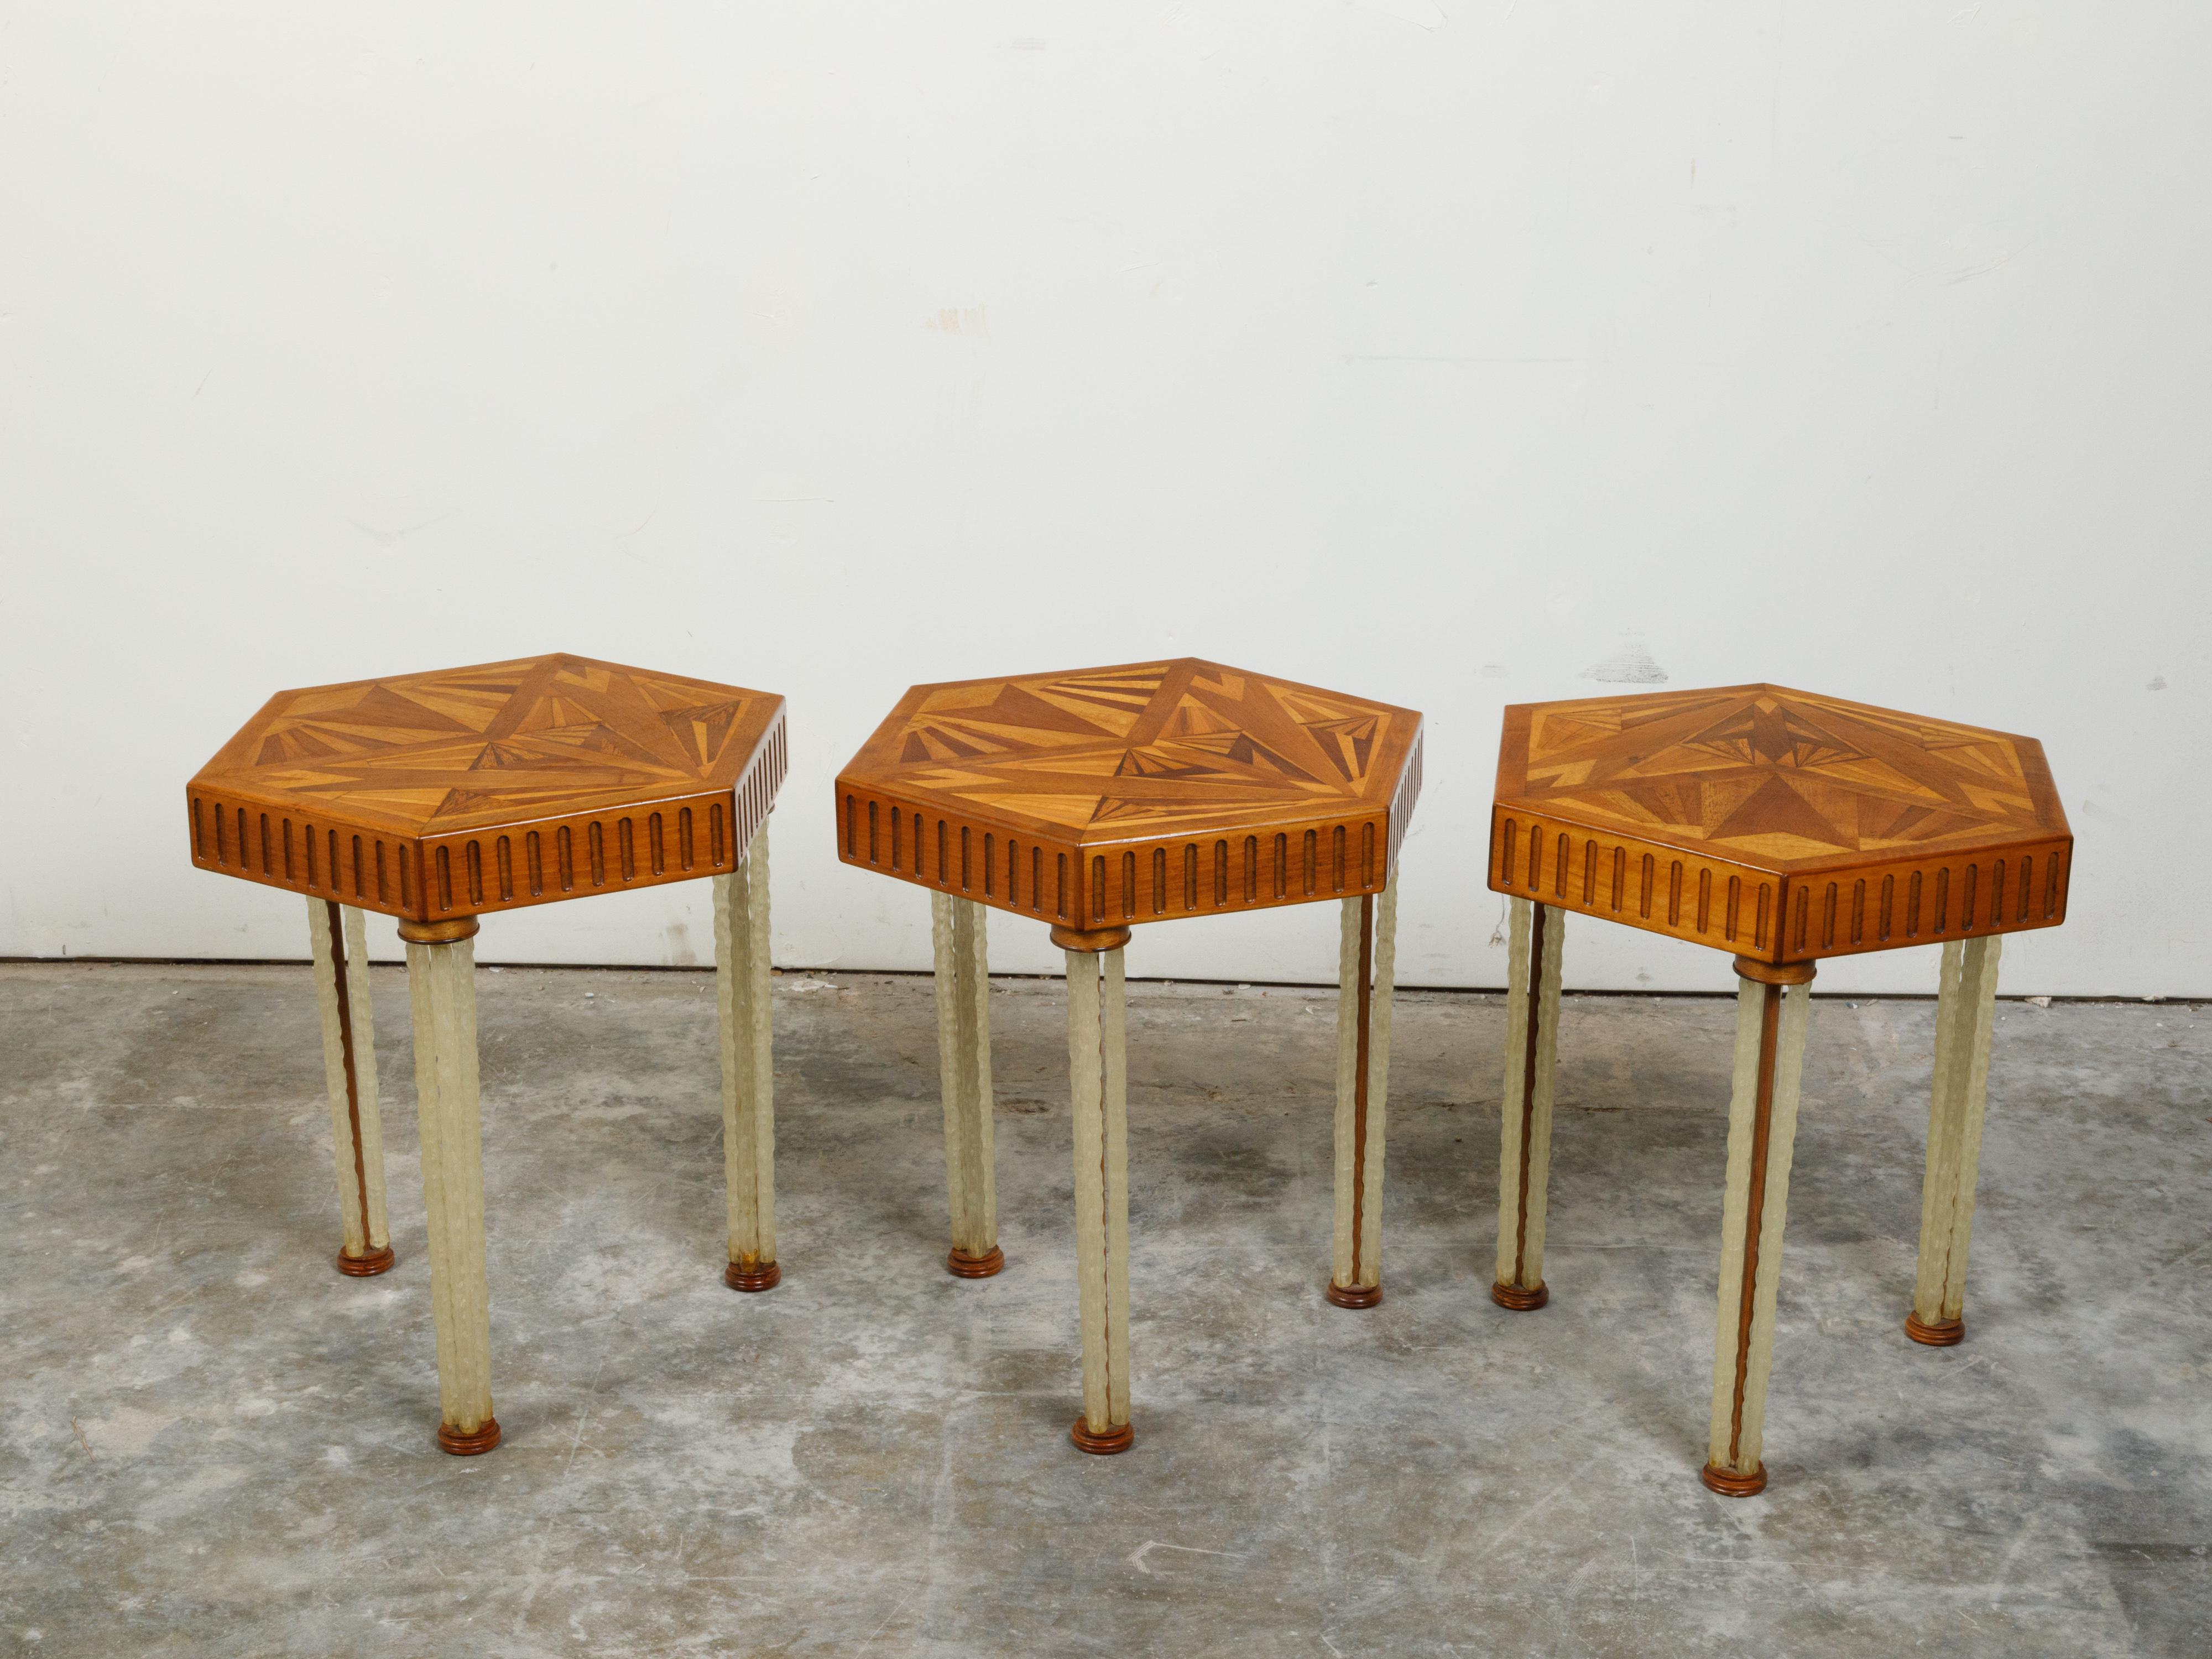 Art Deco 1930s Side Tables with Hexagonal Marquetry Tops and Lucite Legs In Good Condition For Sale In Atlanta, GA